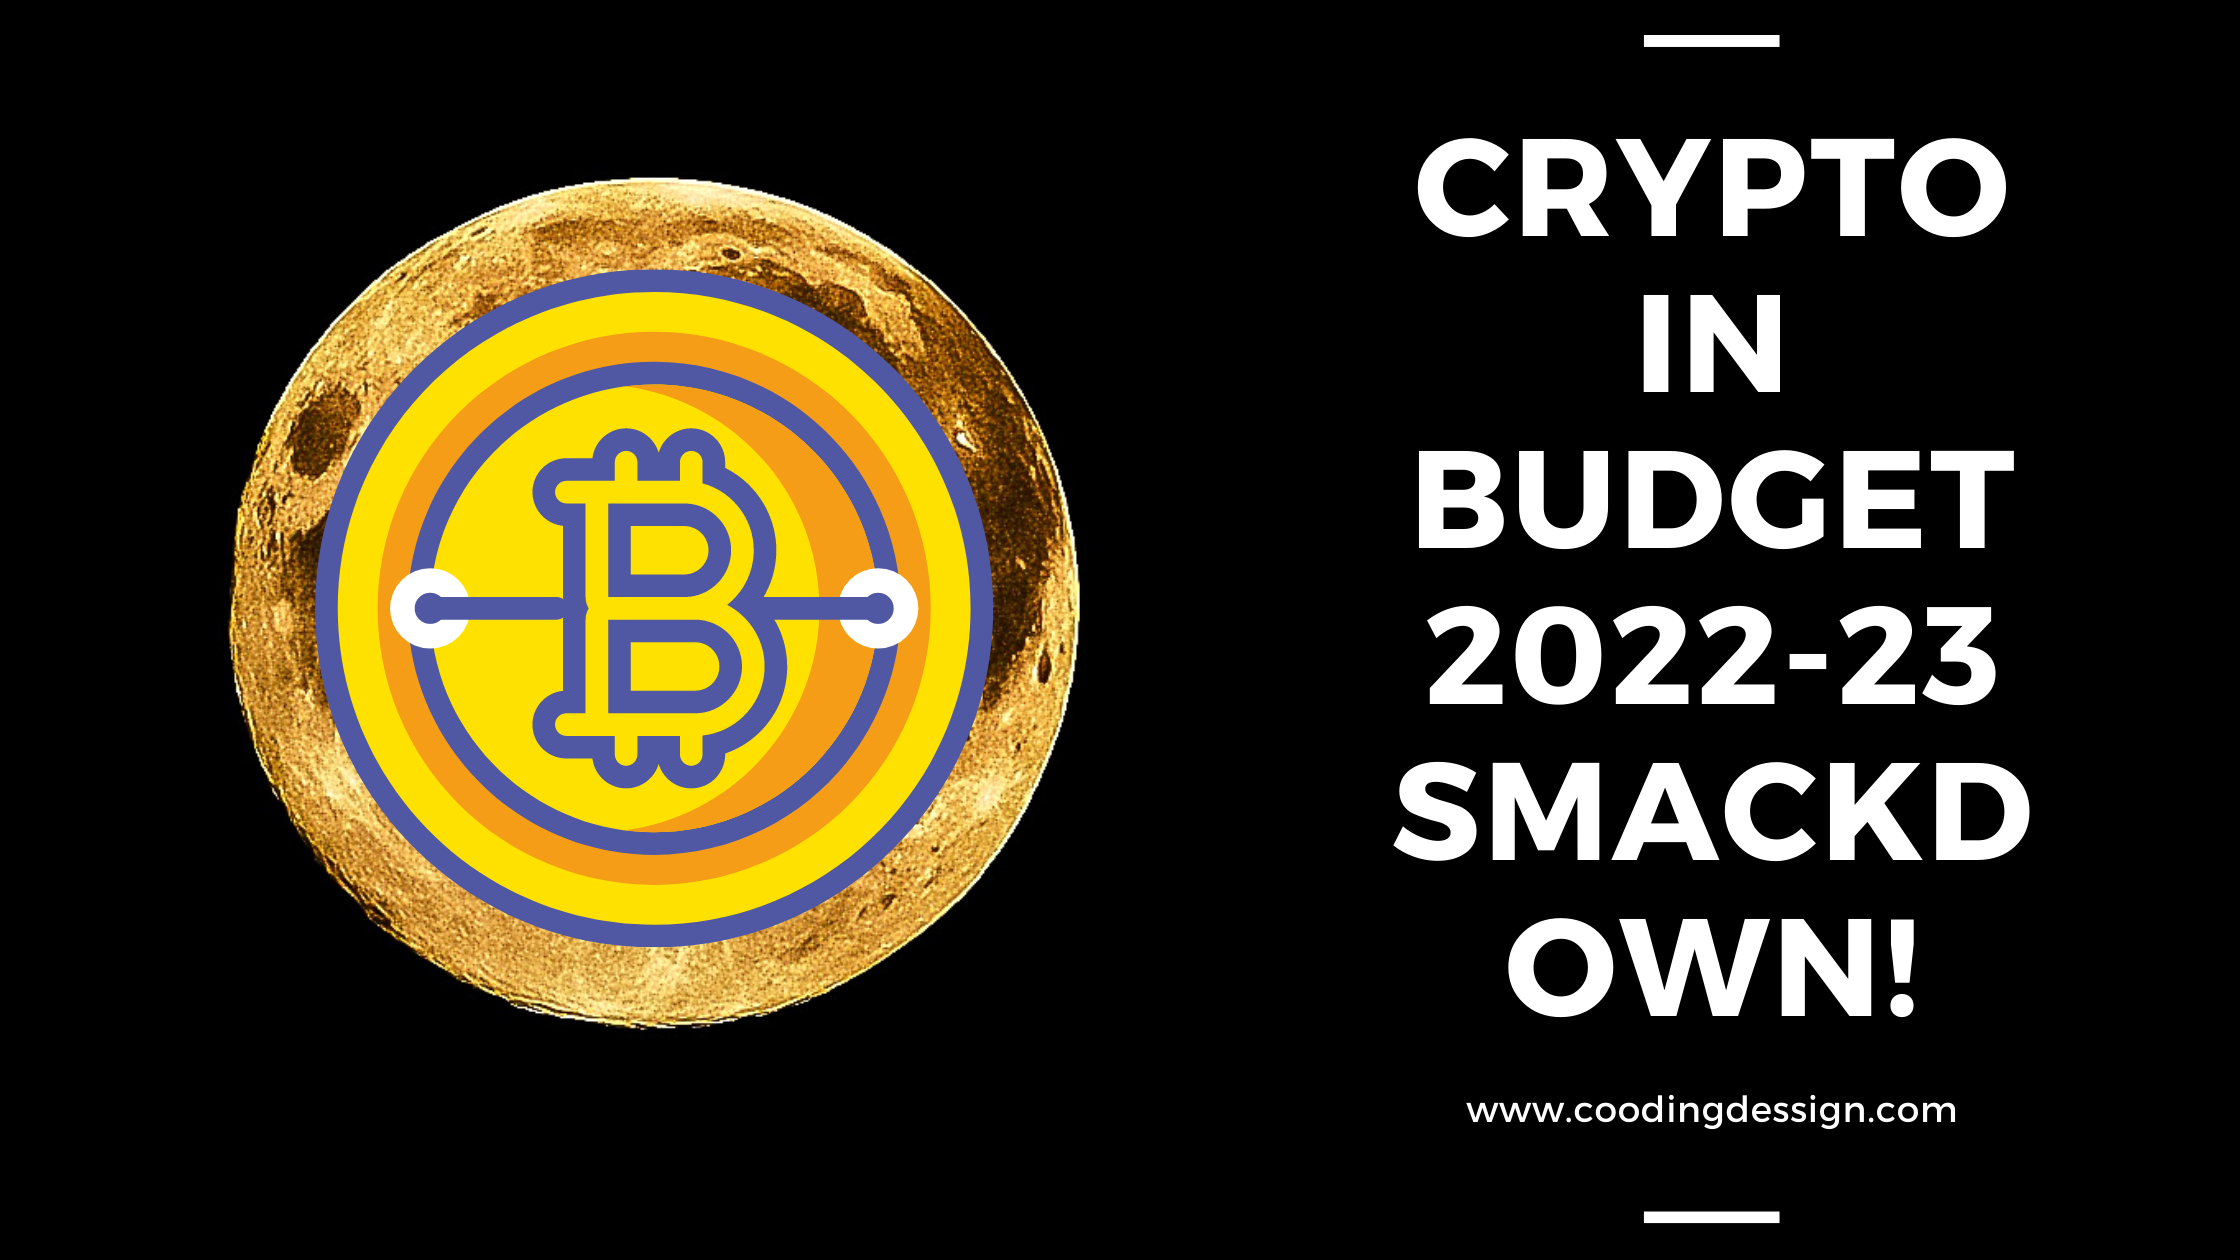 CRYPTO IN BUDGET 2022-23 Smackdown!